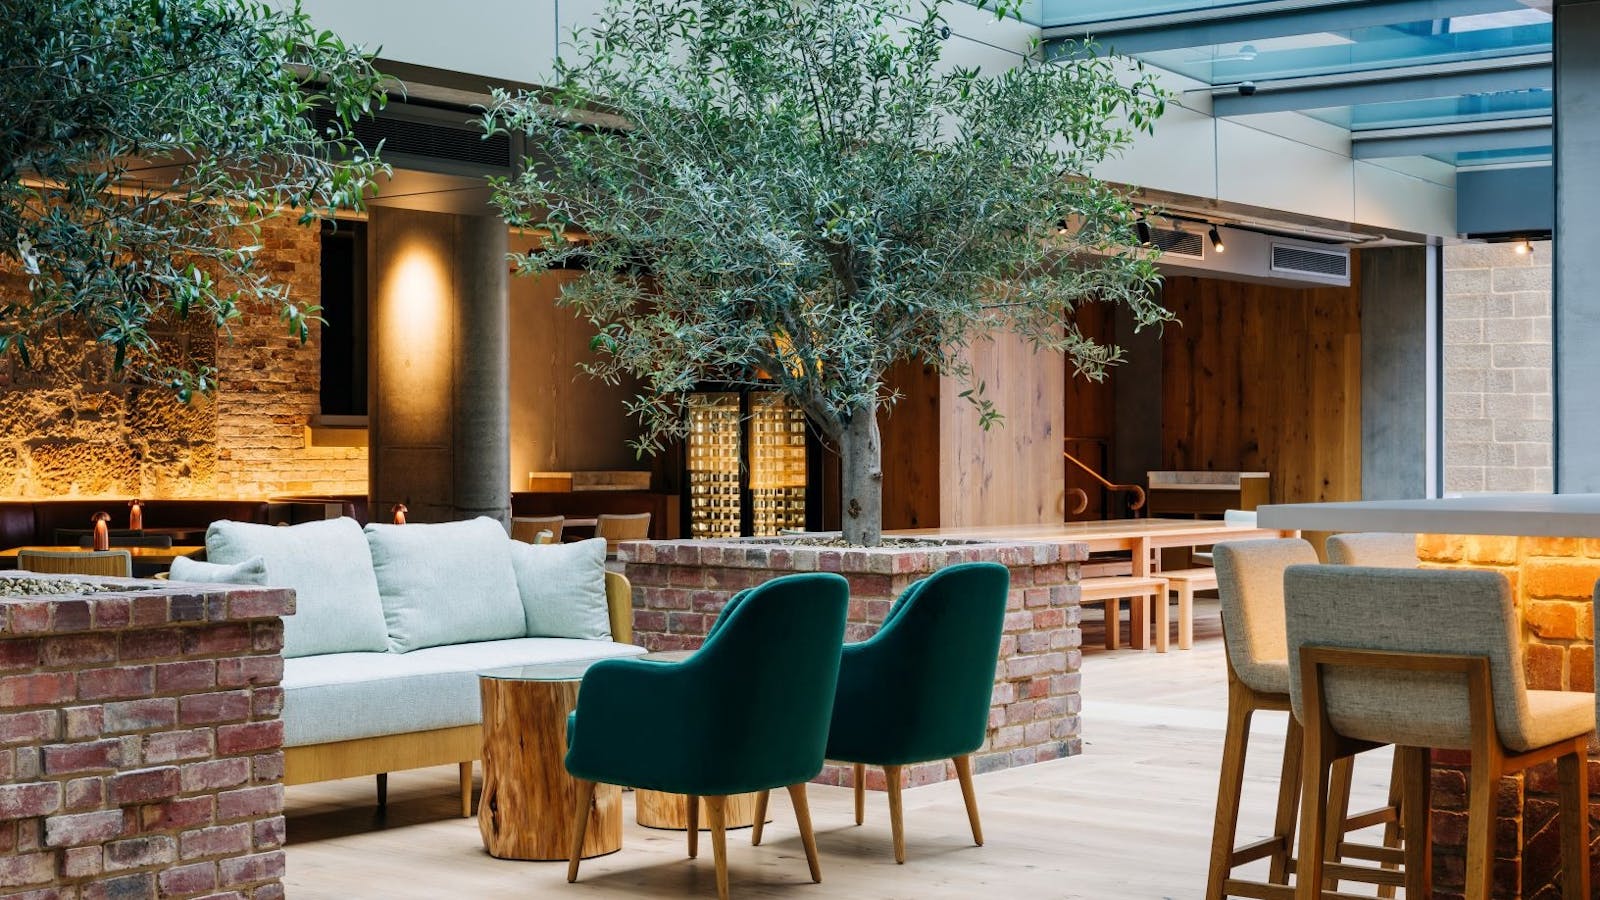 Peppina offers a light filled atrium featuring mature olive trees